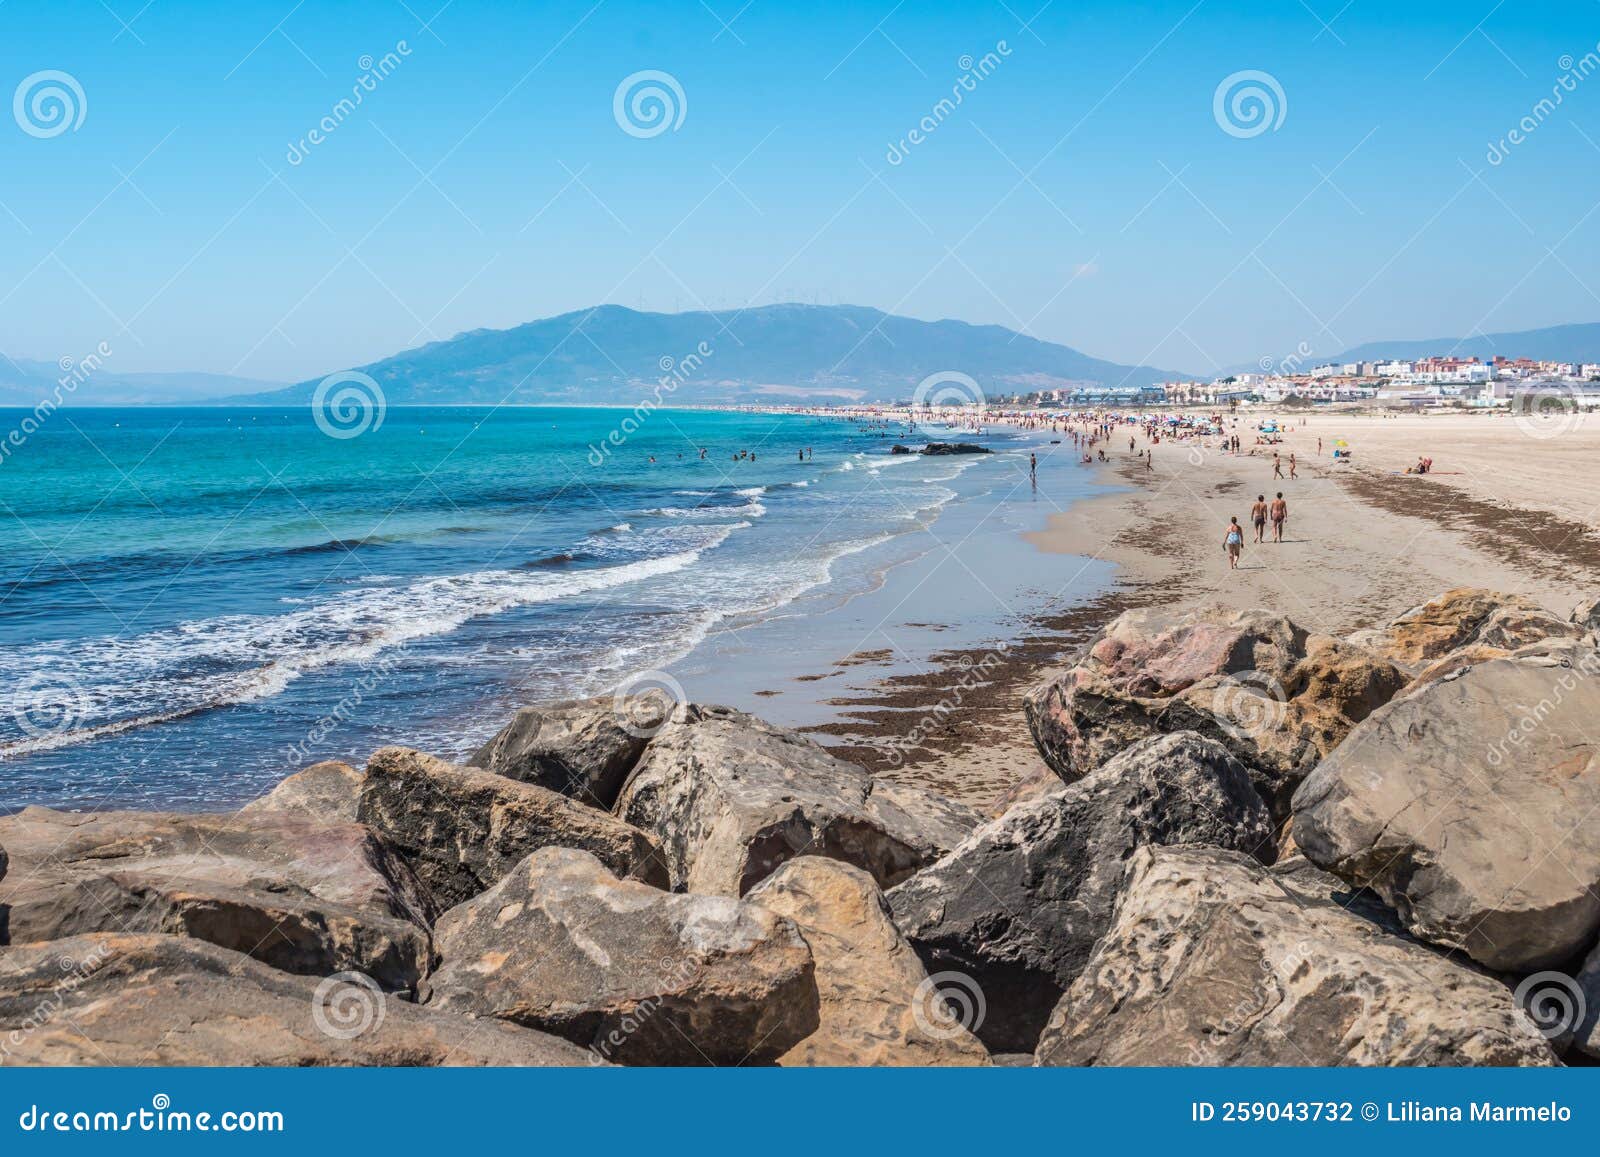 rocks overlooking the sand and sea of los lances beach, silhouettes of bathers and mountain in the background, tarifa spain